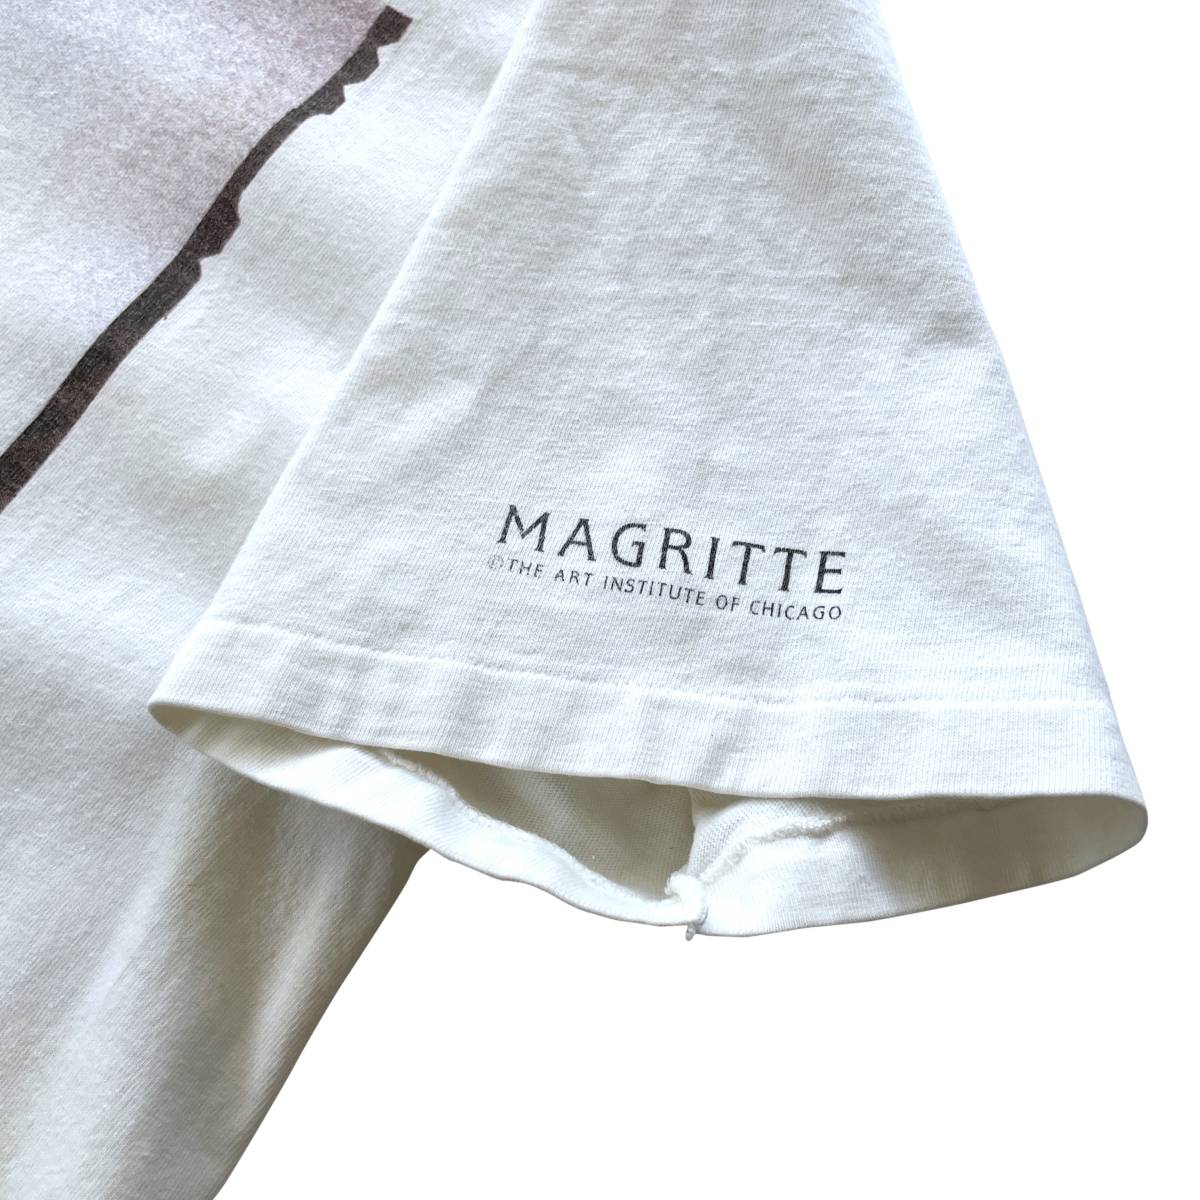 【Vintage】ルネ・マグリット Tシャツ Rene Magritte フォト THE ART INSTITUTE OF CHICAGO シカゴ美術館 Hanes ヘインズ MADE IN USA_画像4